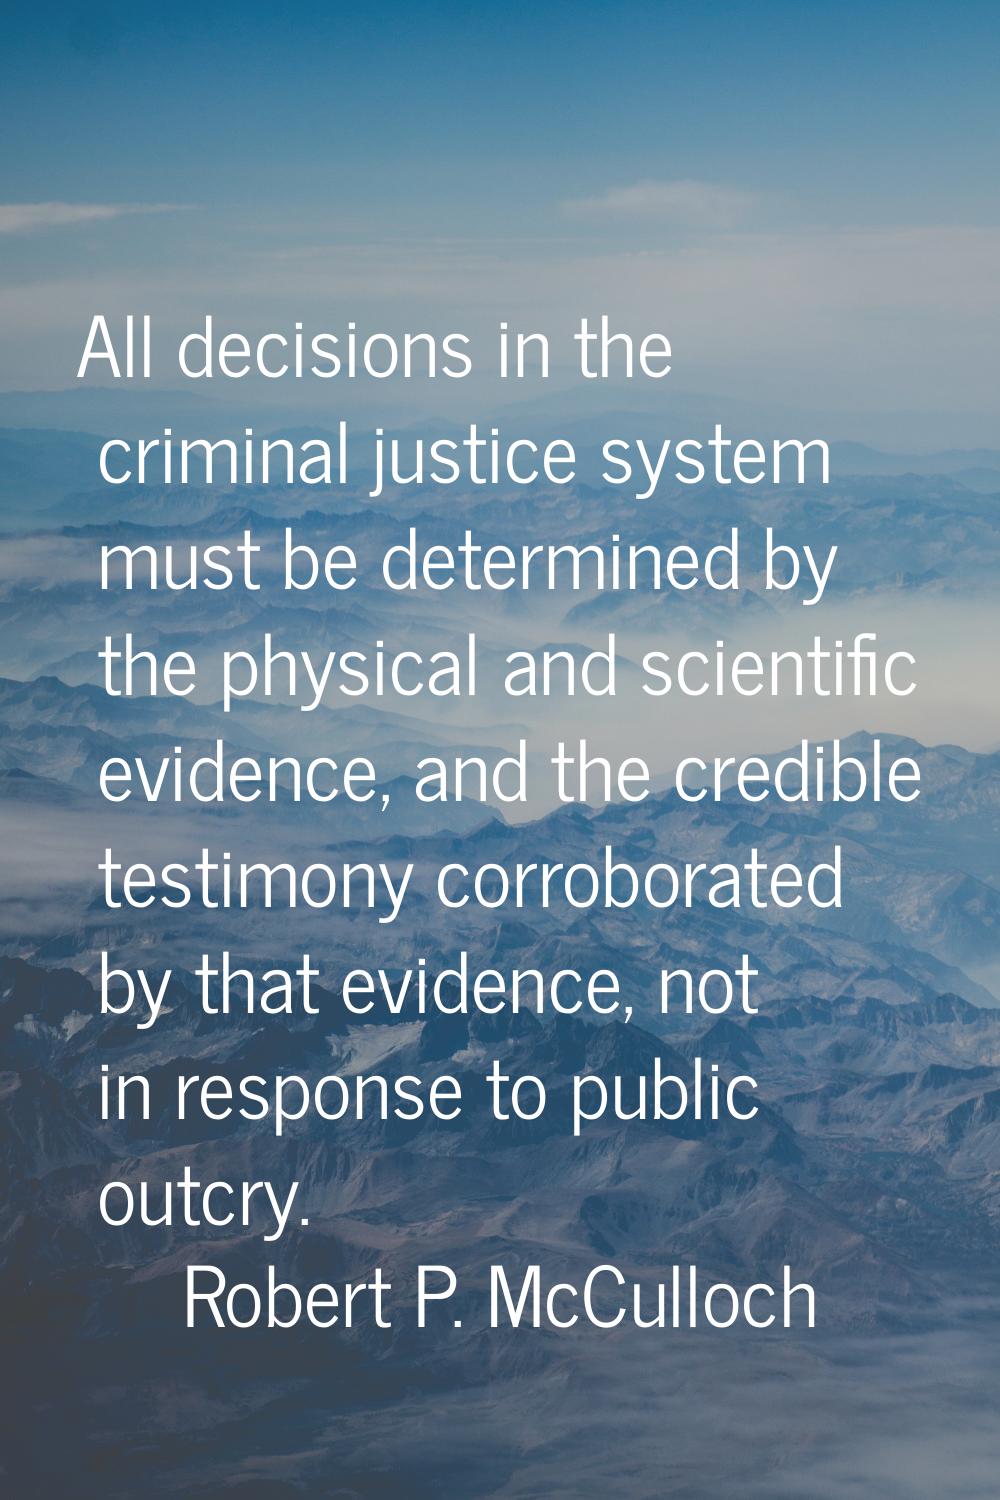 All decisions in the criminal justice system must be determined by the physical and scientific evid